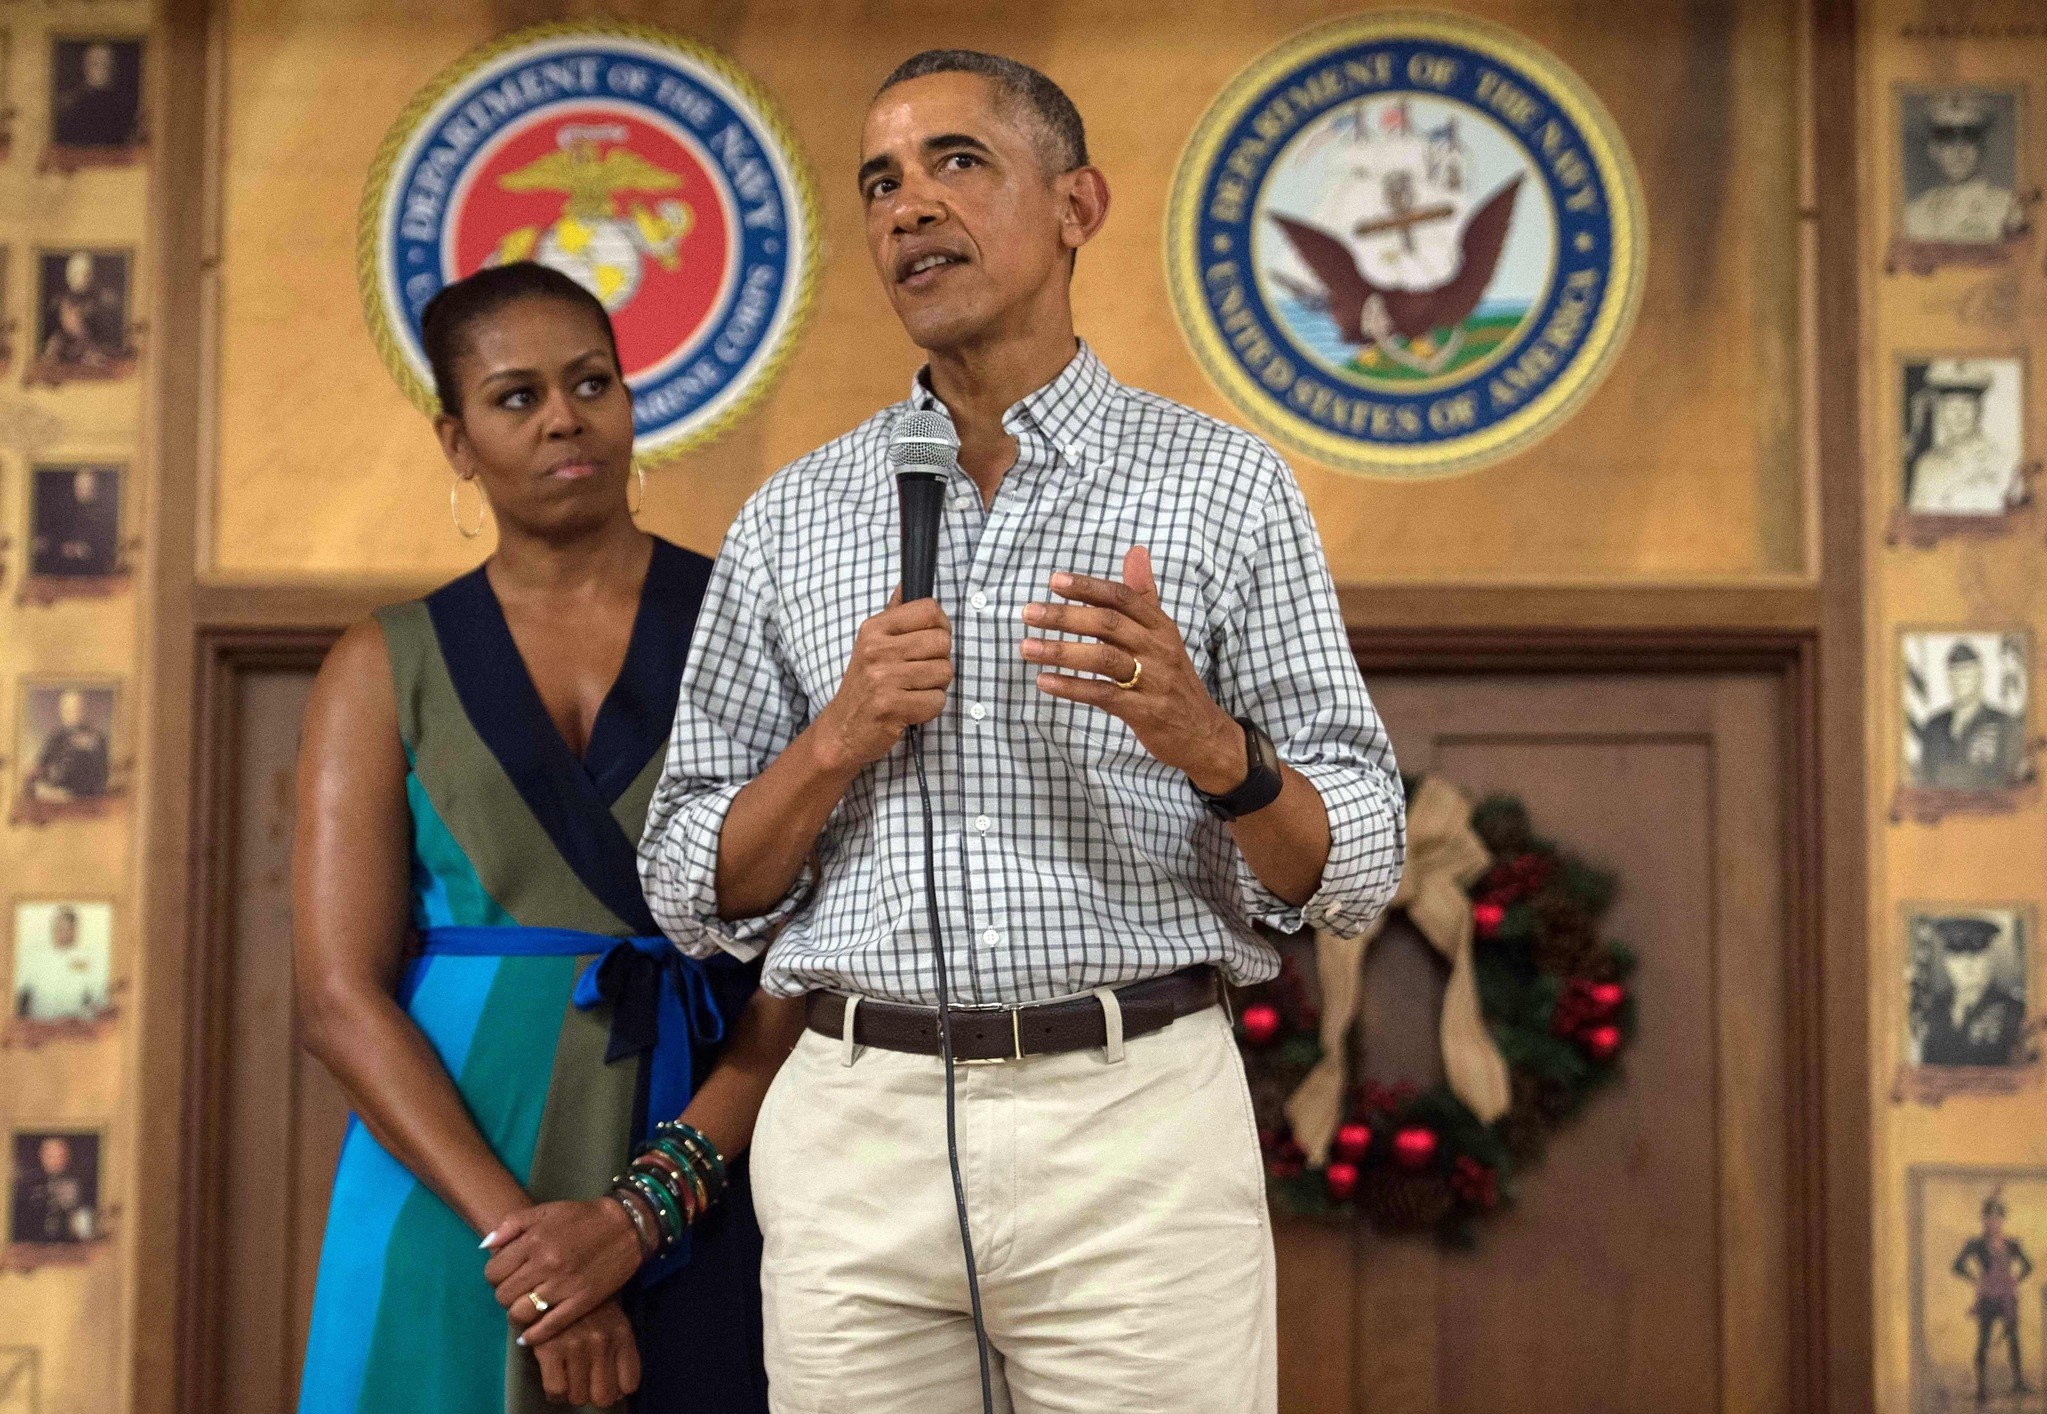 Obama addresses troops with First Lady Michelle Obama at Marine Corps Base Hawaii in Kailua on Dec. 25, 2016. (AFP Photo)